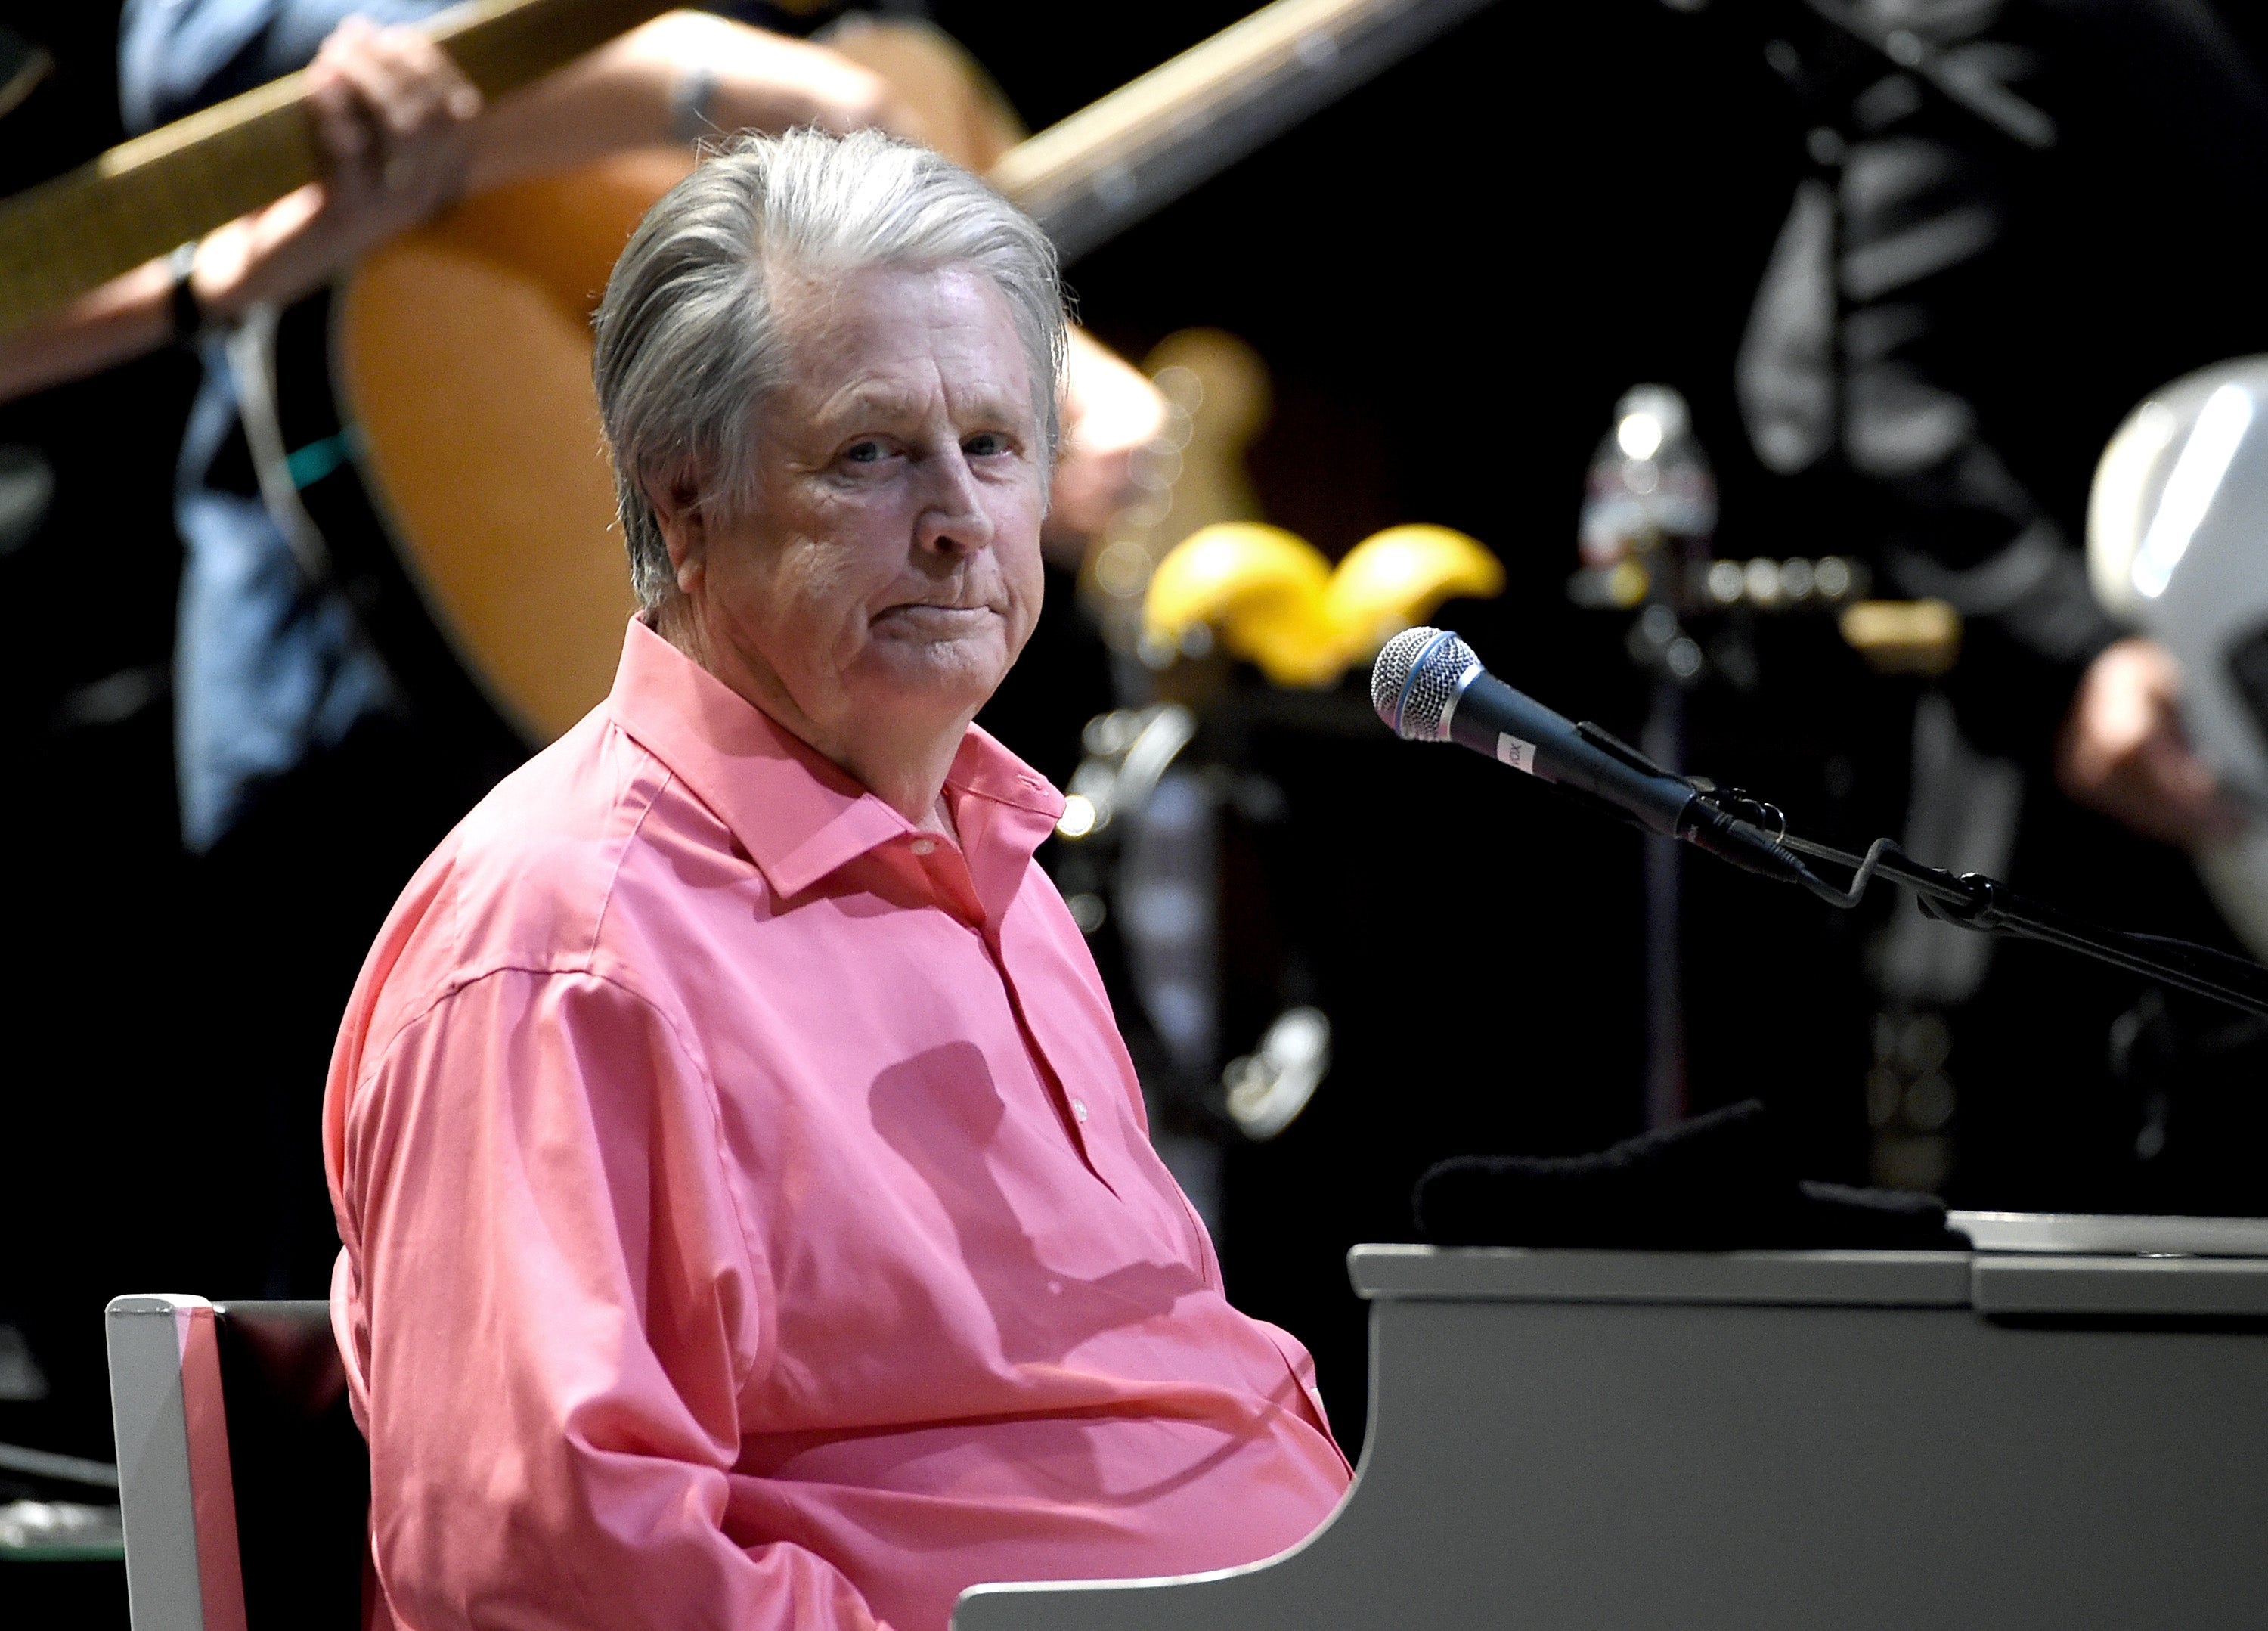 Brian Wilson is the subject of a new documentary